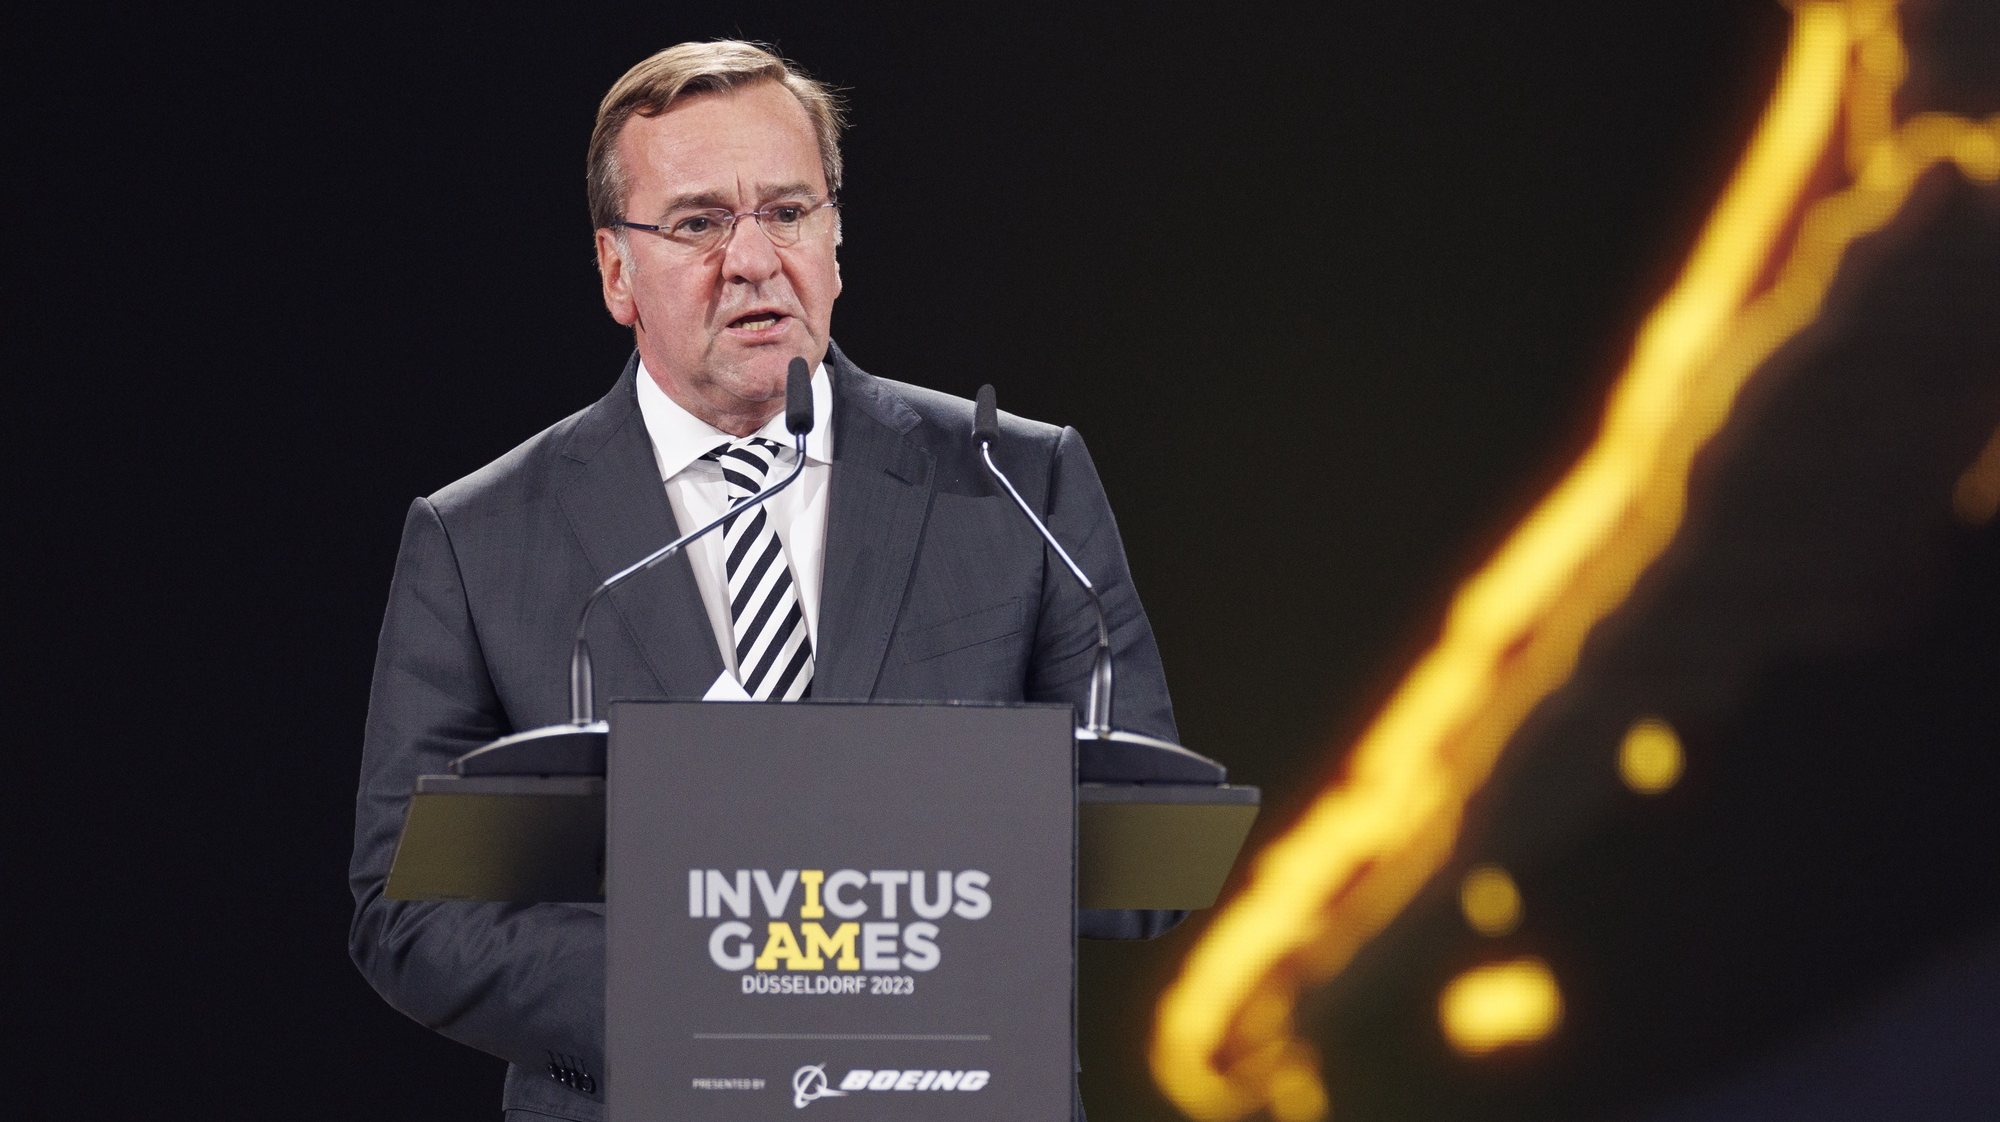 epa10851175 Germany’s Minister of Defense Boris Pistorius, delivers a speech during the Opening ceremony of the 6th Invictus Games in Duesseldorf, Germany, 09 September 2023. The Invictus Games 2023 will take place from 09 to 16 September in Duesseldorf and are intended for military personnel and veterans who have been psychologically or physically injured in service.  EPA/CHRISTOPHER NEUNDORF